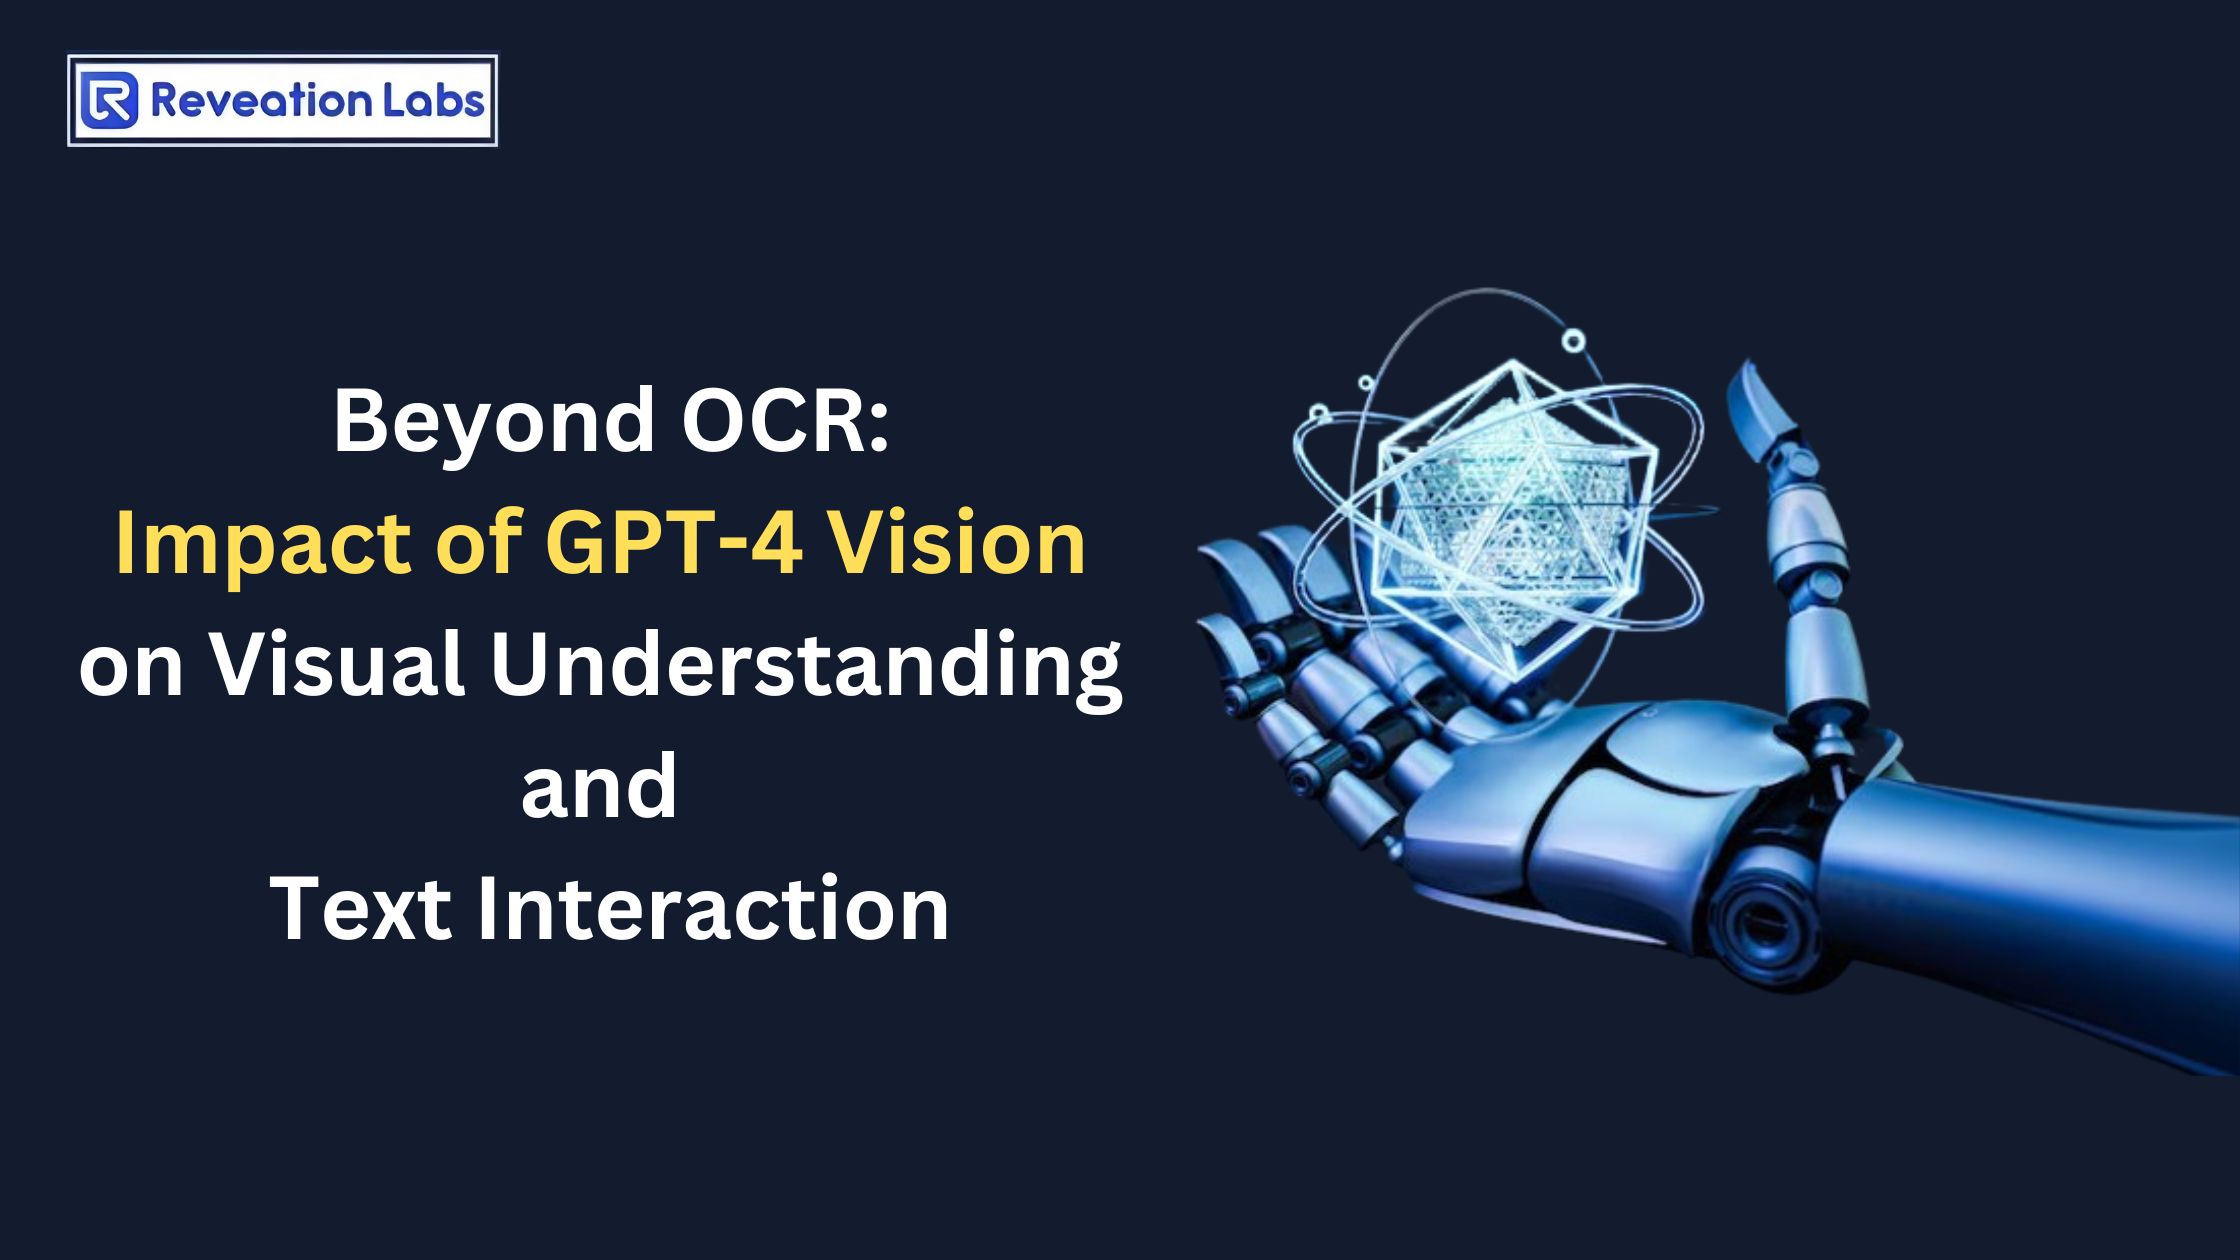   Beyond OCR: GPT-4 Vision's Impact on Visual Understanding and Text Interaction